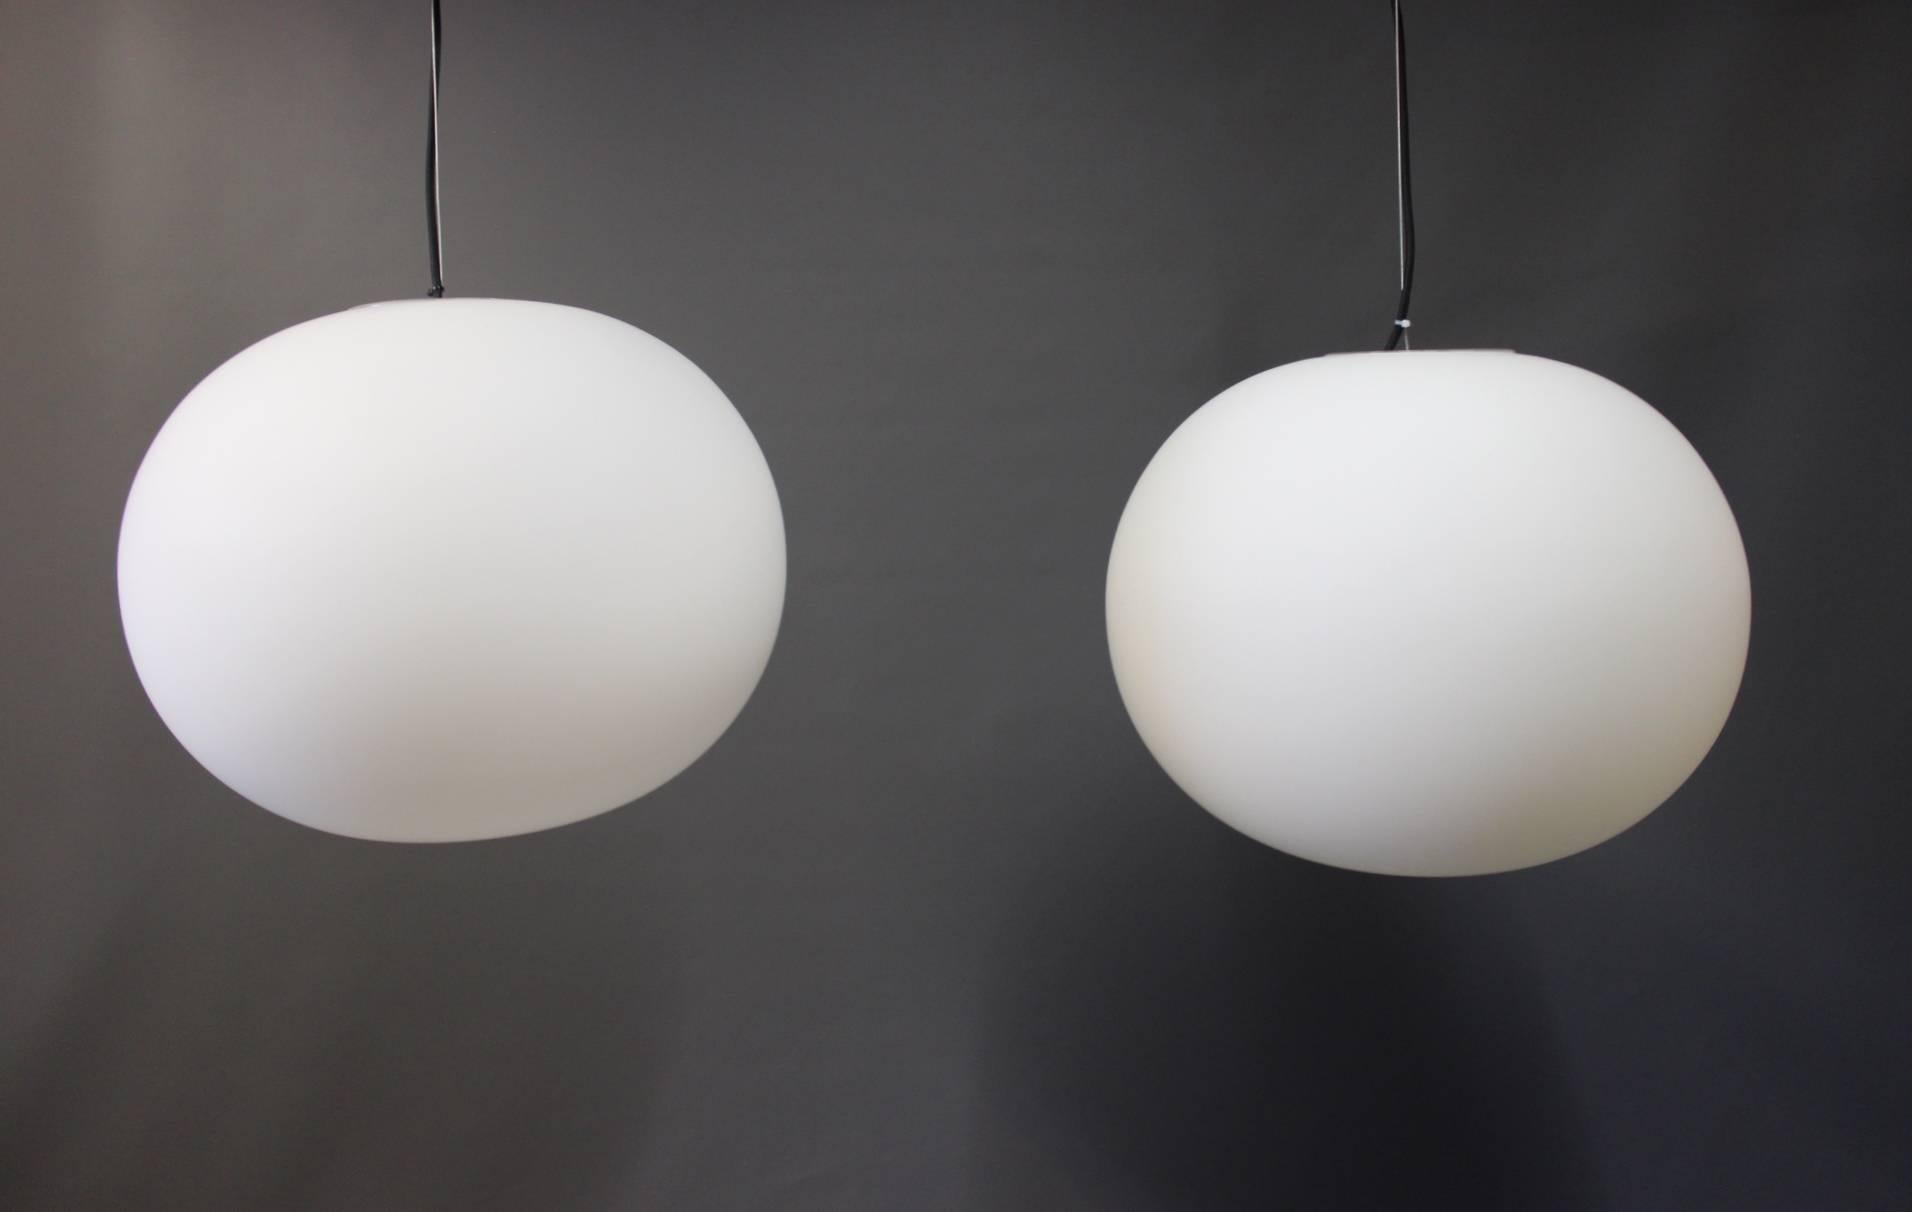 A pair of Glo-ball pendants designed by Jasper Morrison in 1998 for the Italian manufacturer Flos. The pendants are in great condition.